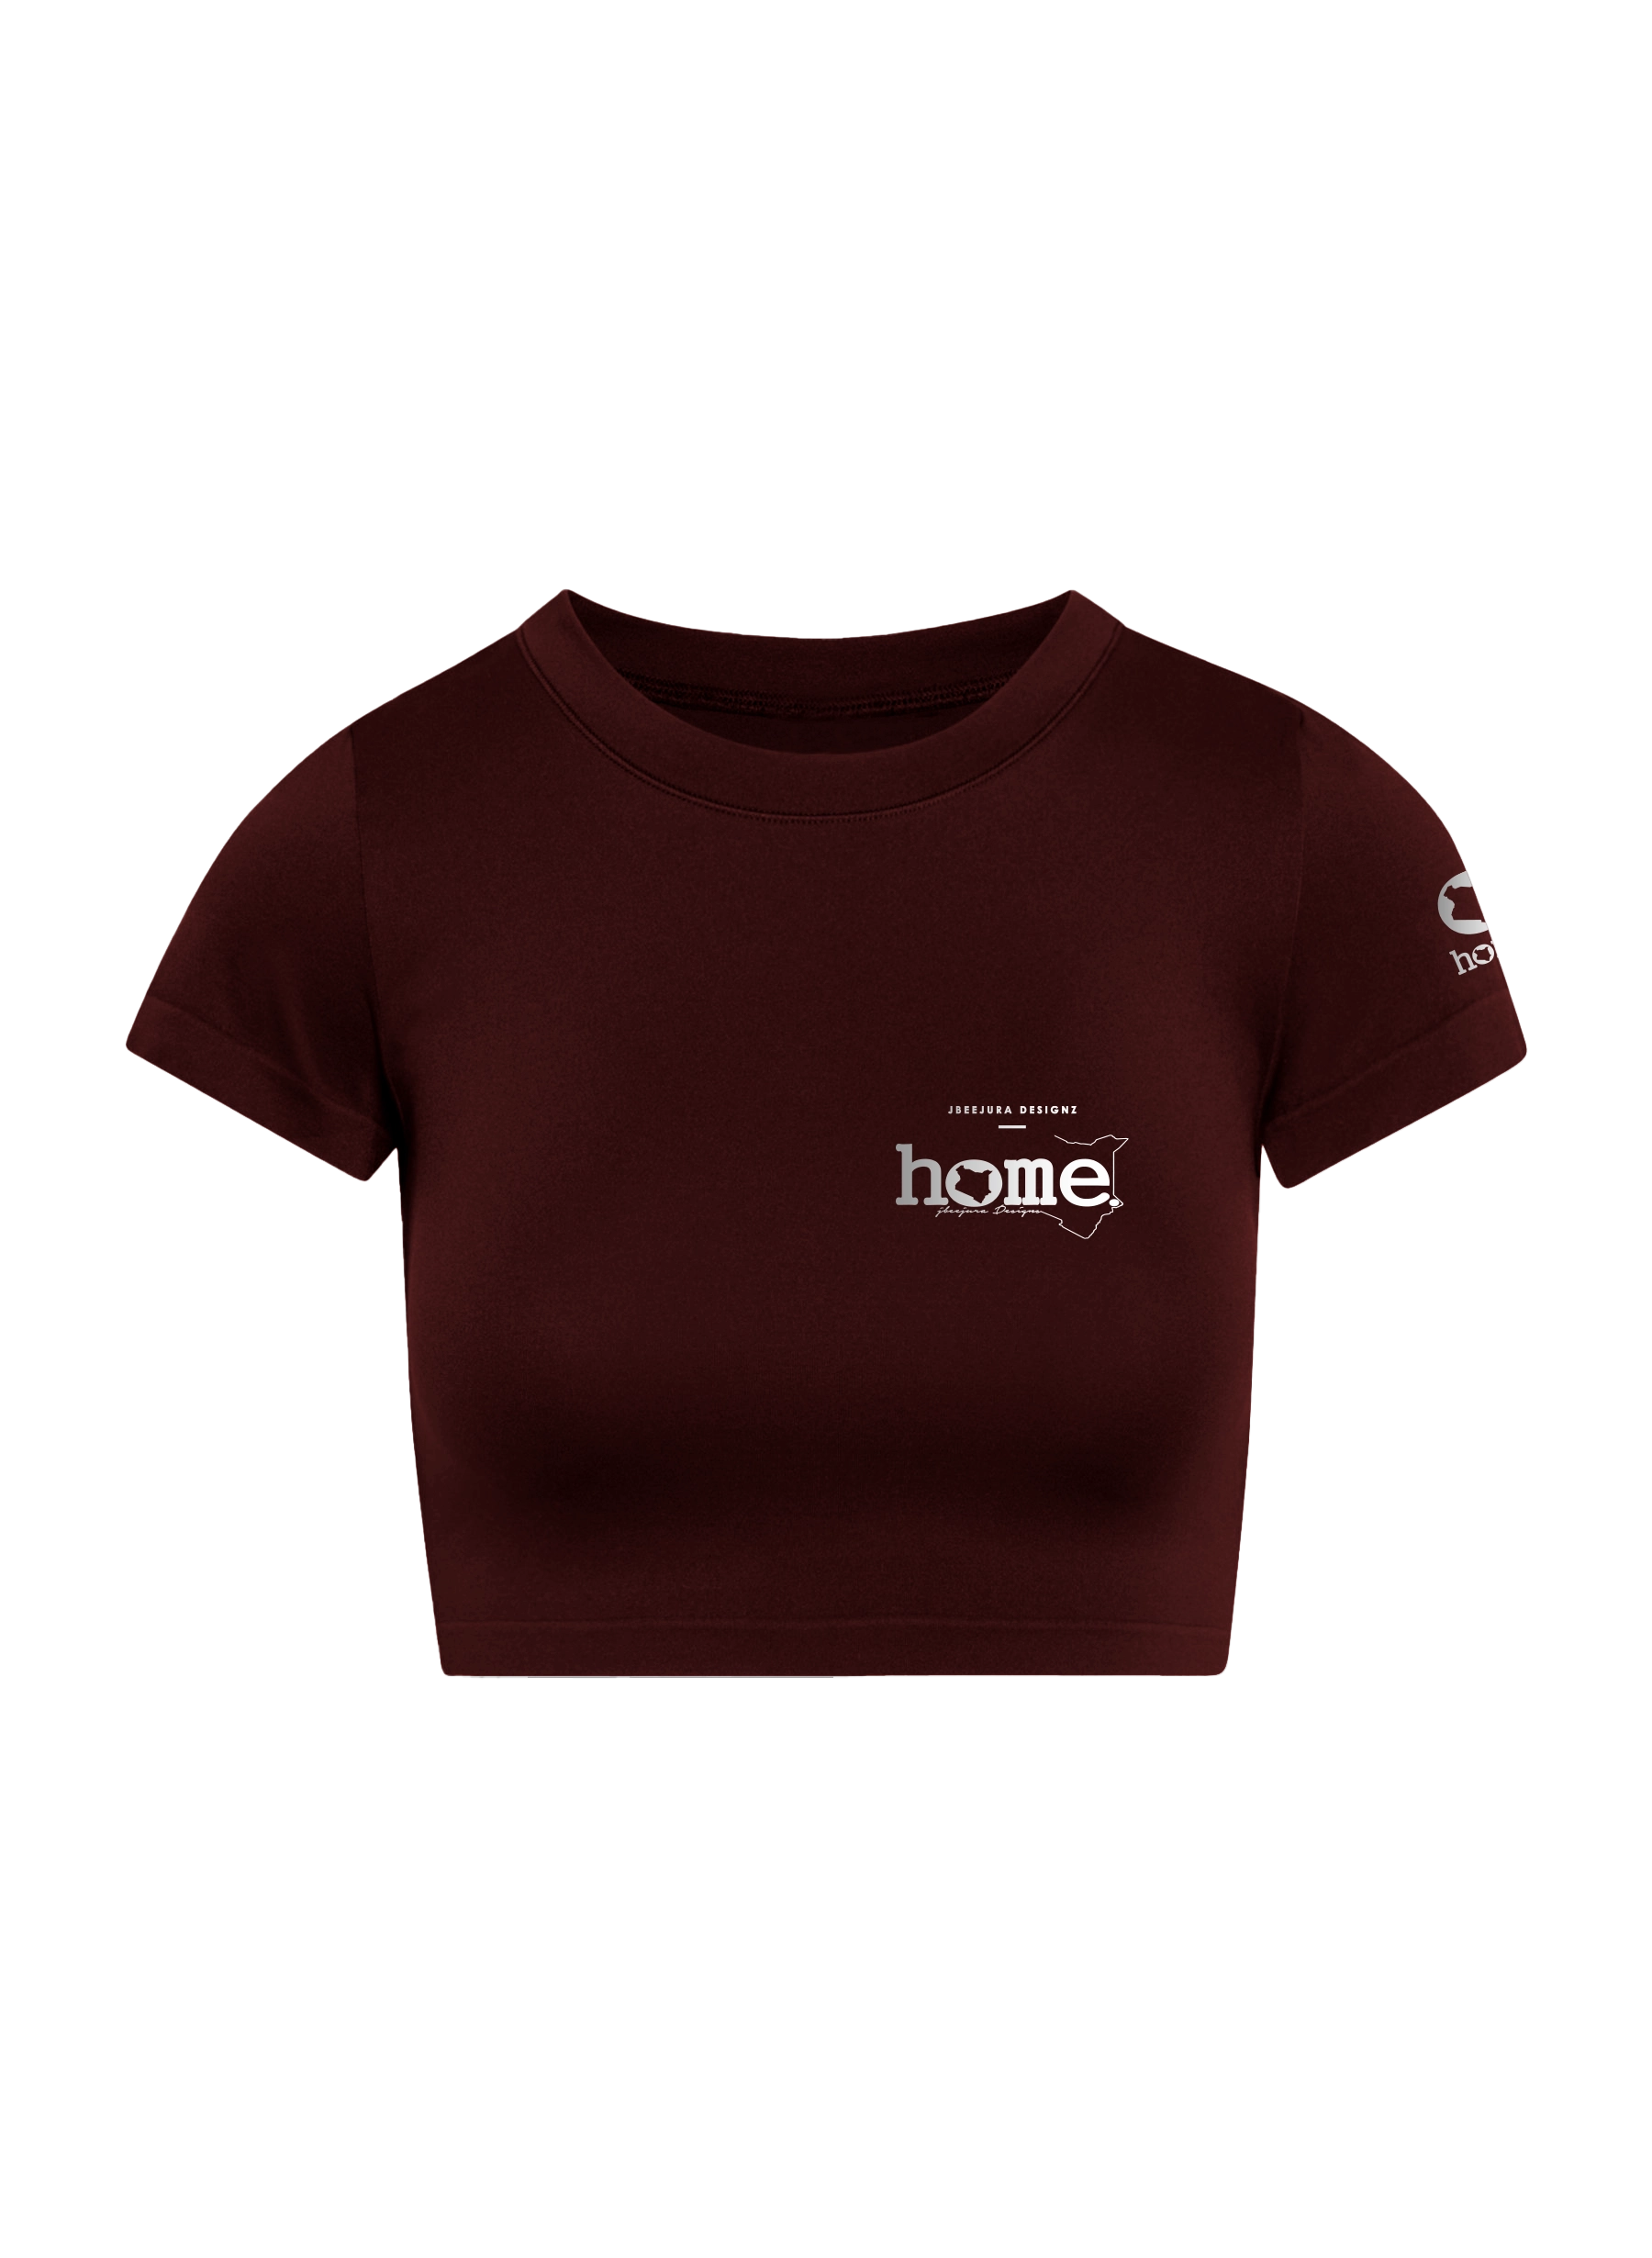 home_254 SHORT SLEEVED MAROON CROPPED ARIA TEE WITH A SILVER 3D WORDS PRINT 